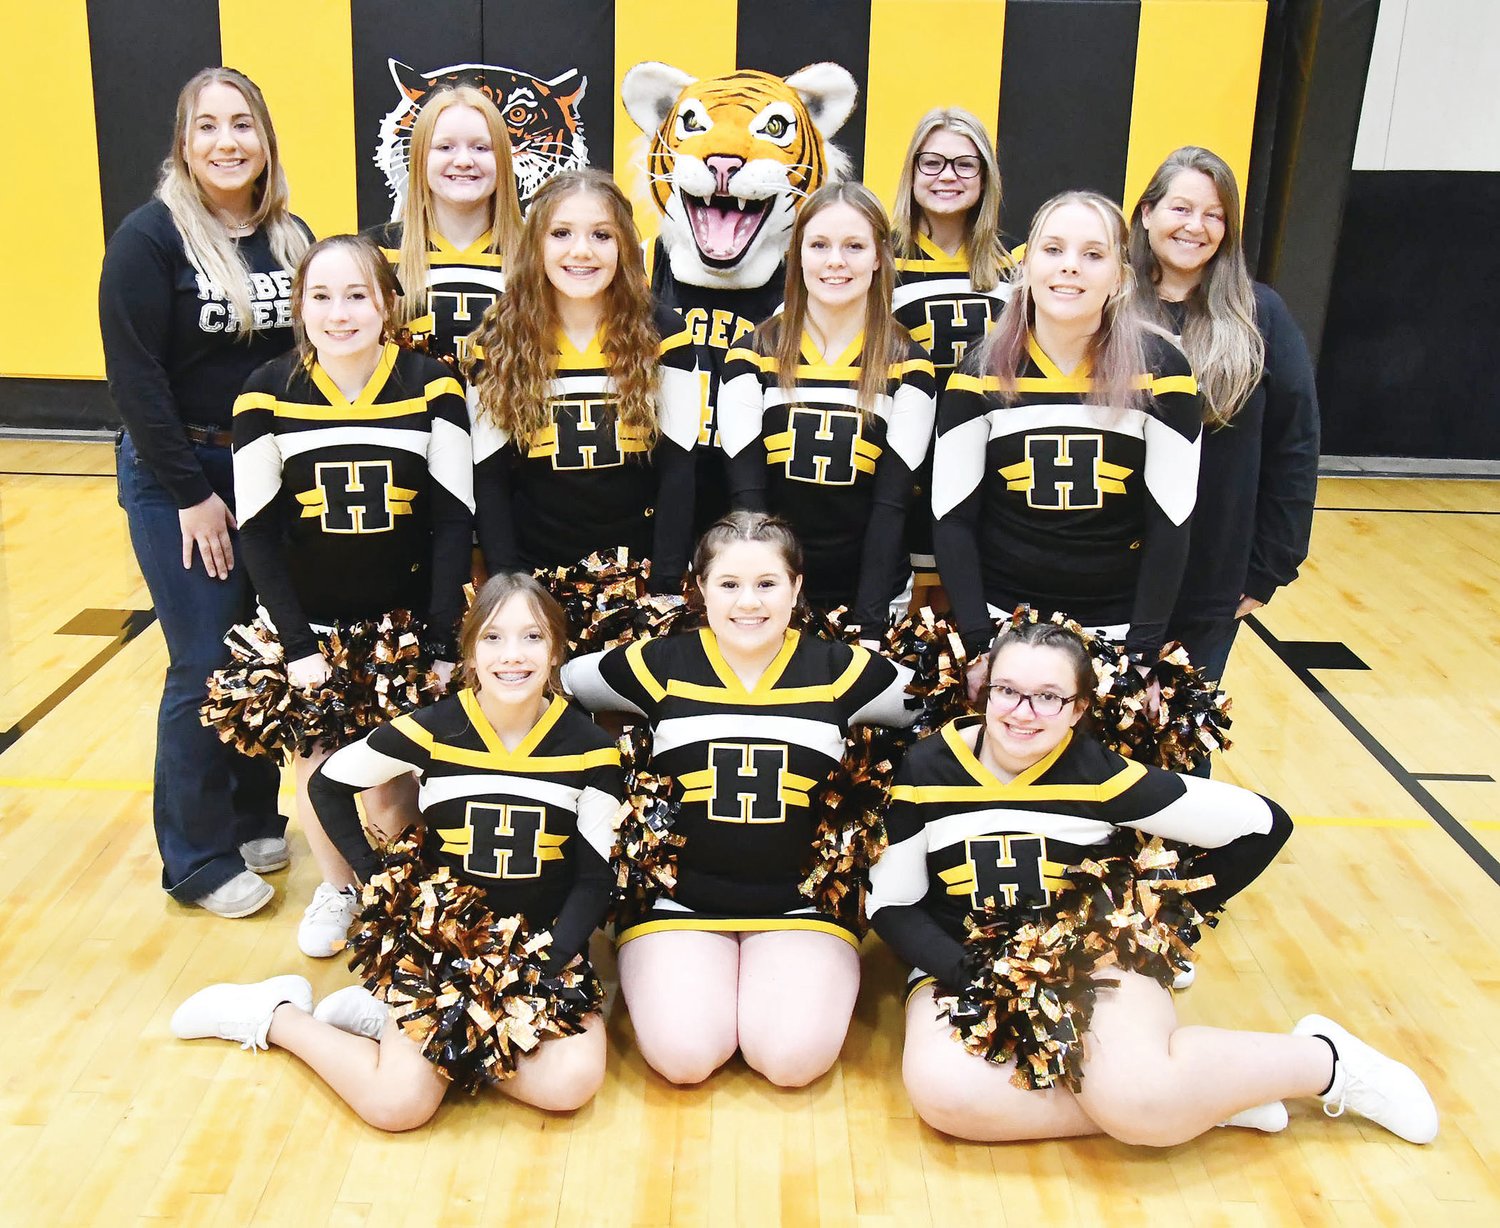 The Higbee High School cheerleaders perform at all boys and girls basketball games. Here's the roster, in no particular order, Addison White, Ellissia Schaedel, Maddie Seidel, AnnaBelle Perkins, Joey Westfall, Madisyn Smith, Codi Umstattd, Madi White, Taylor Luntsford and Cadence Jones.